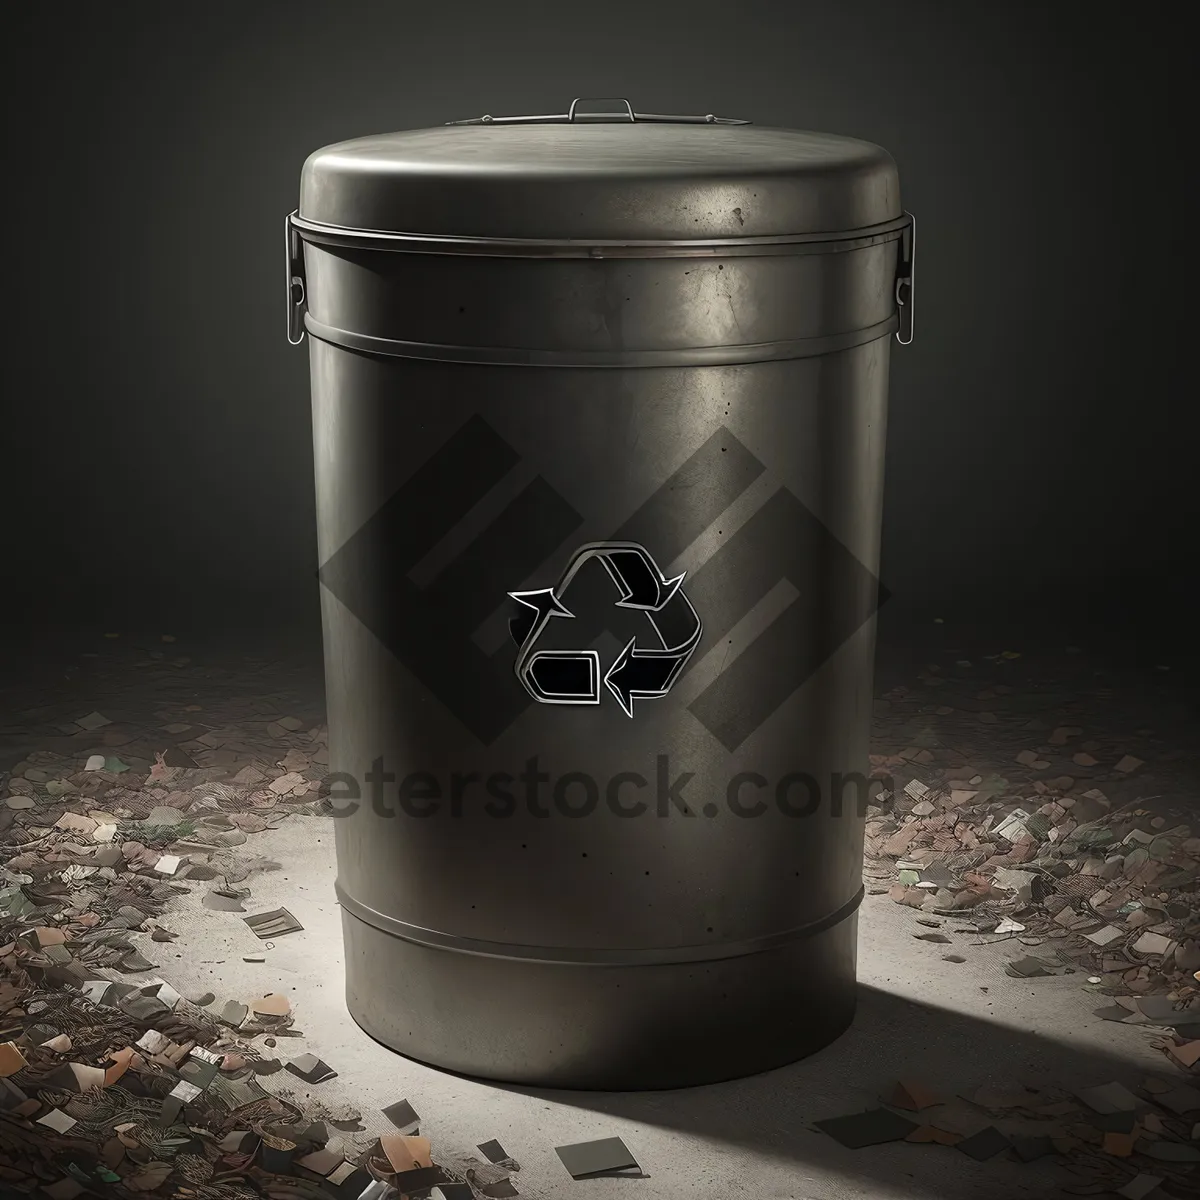 Picture of Ashcan Bin - Vessel for Garbage Disposal